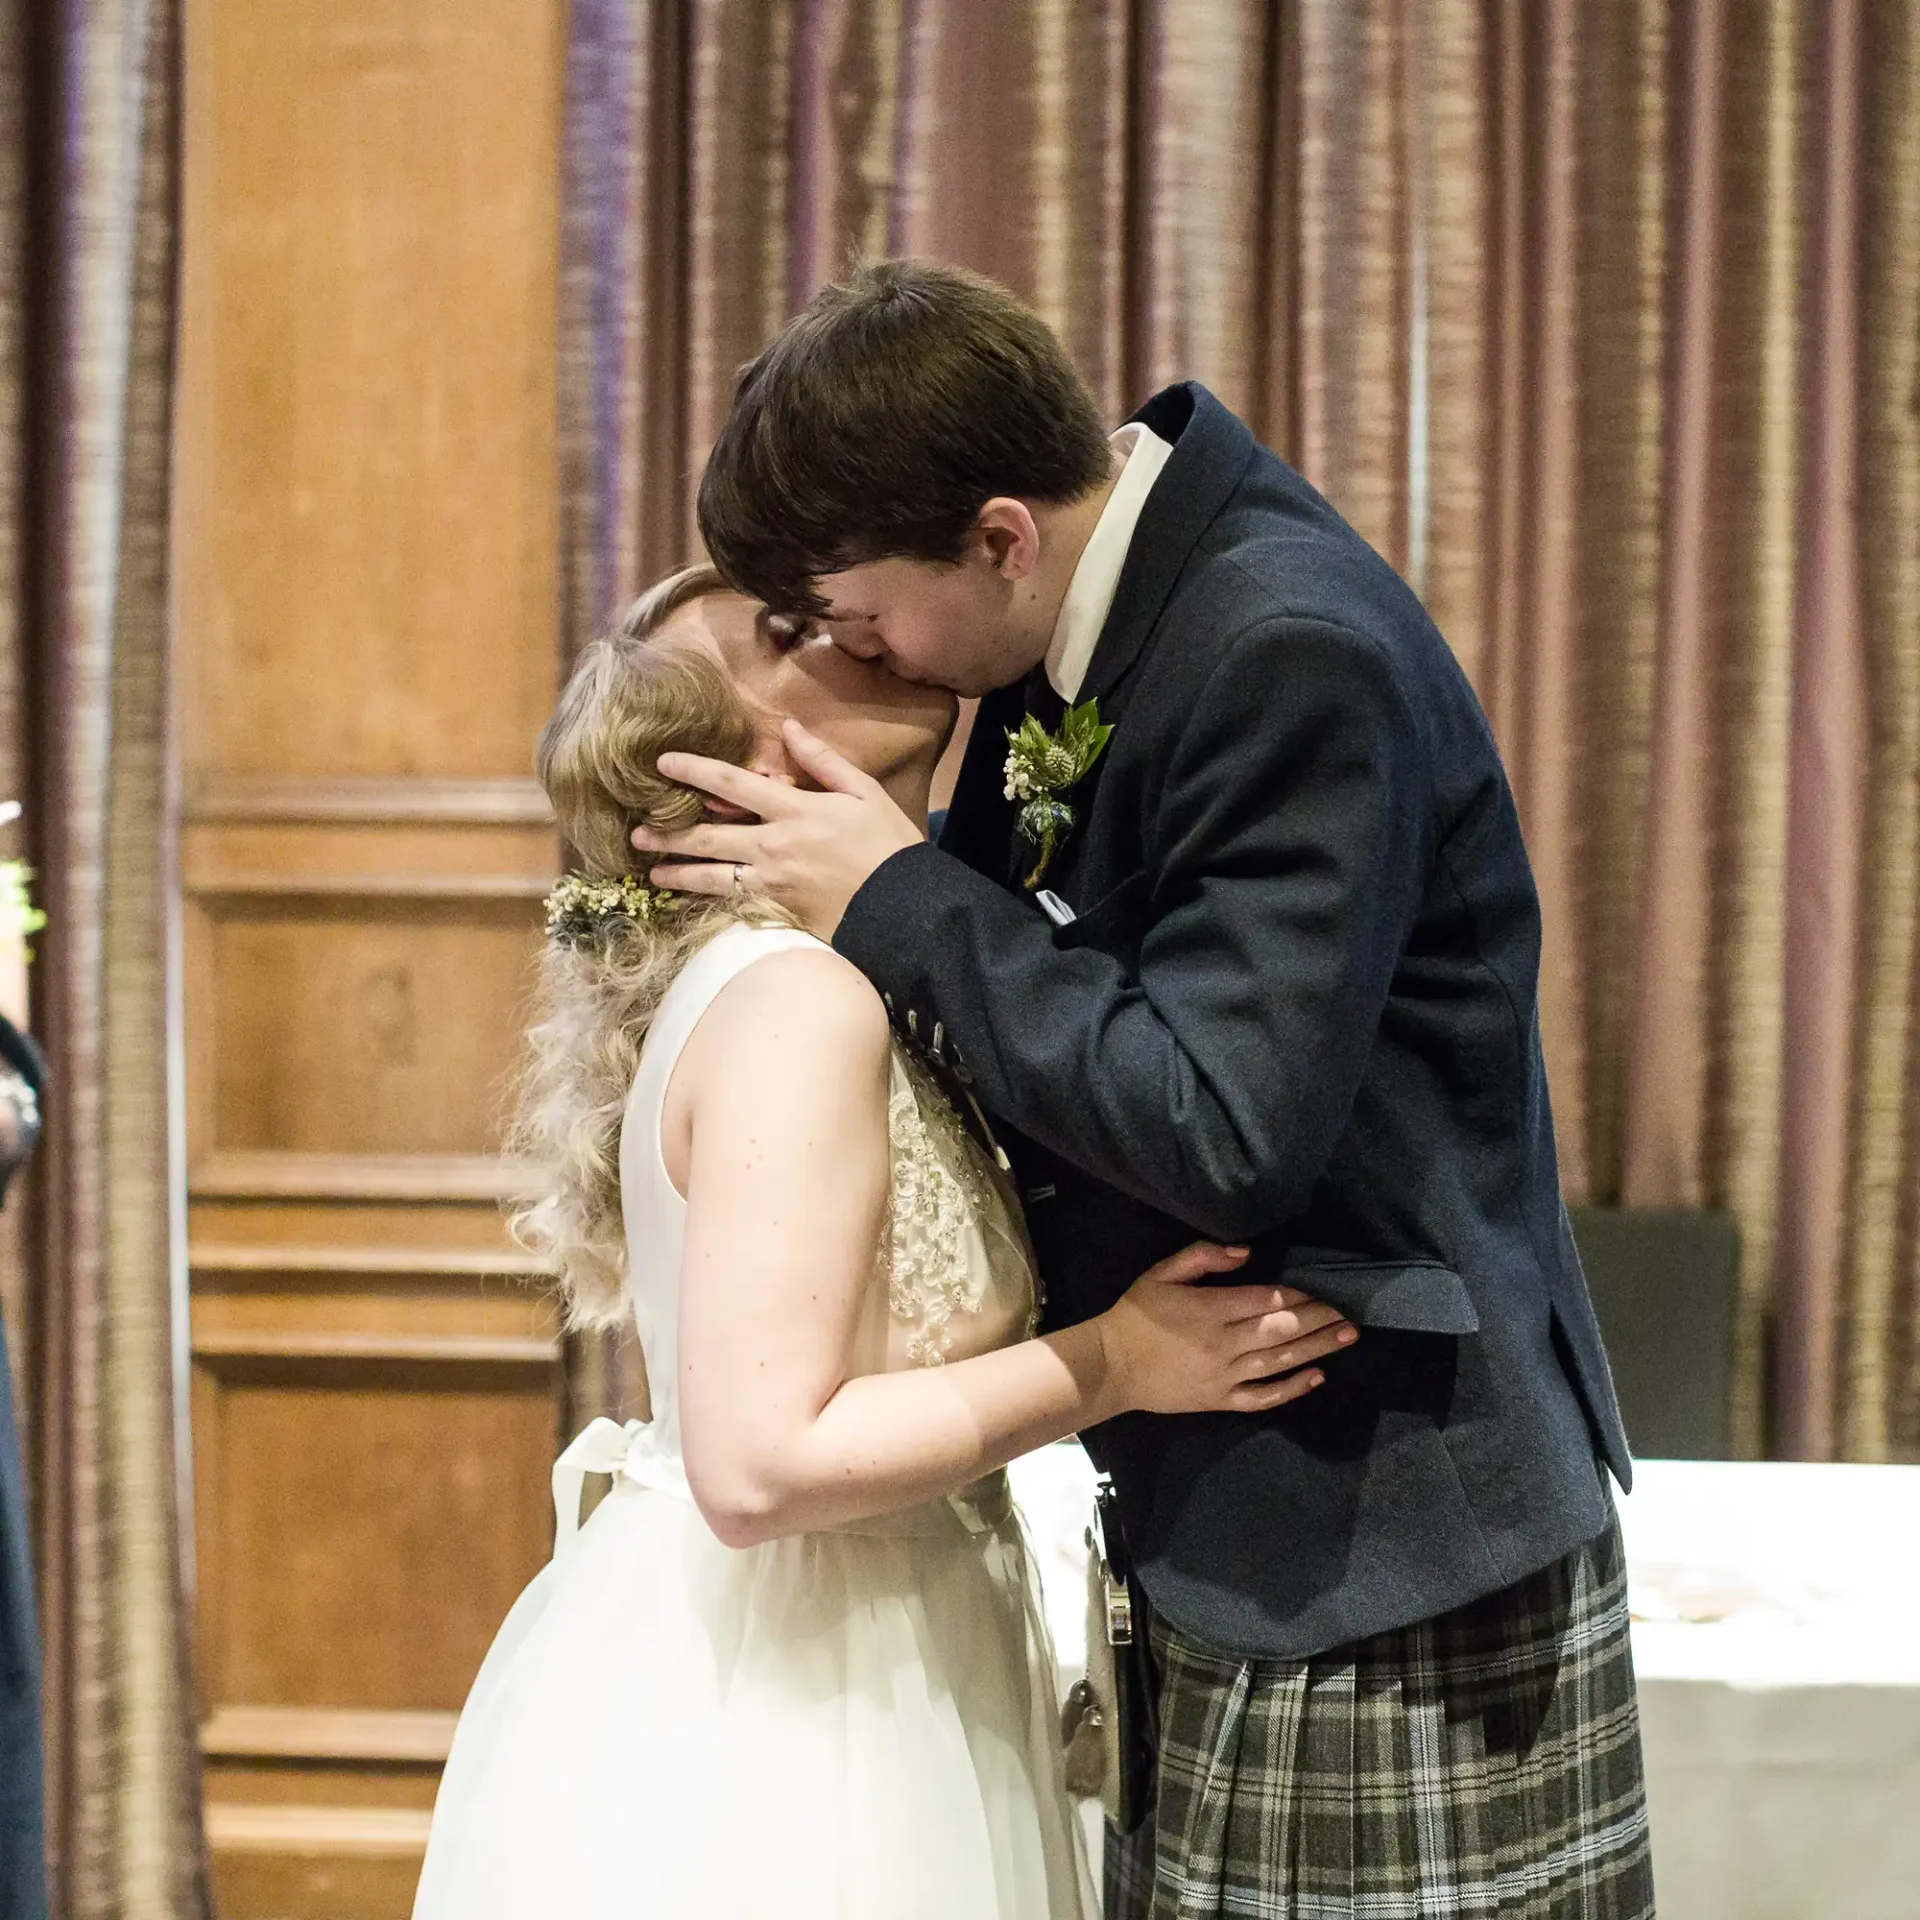 A bride and groom in wedding attire sharing a kiss, with the groom wearing a kilt and the bride a white dress with floral headpiece.